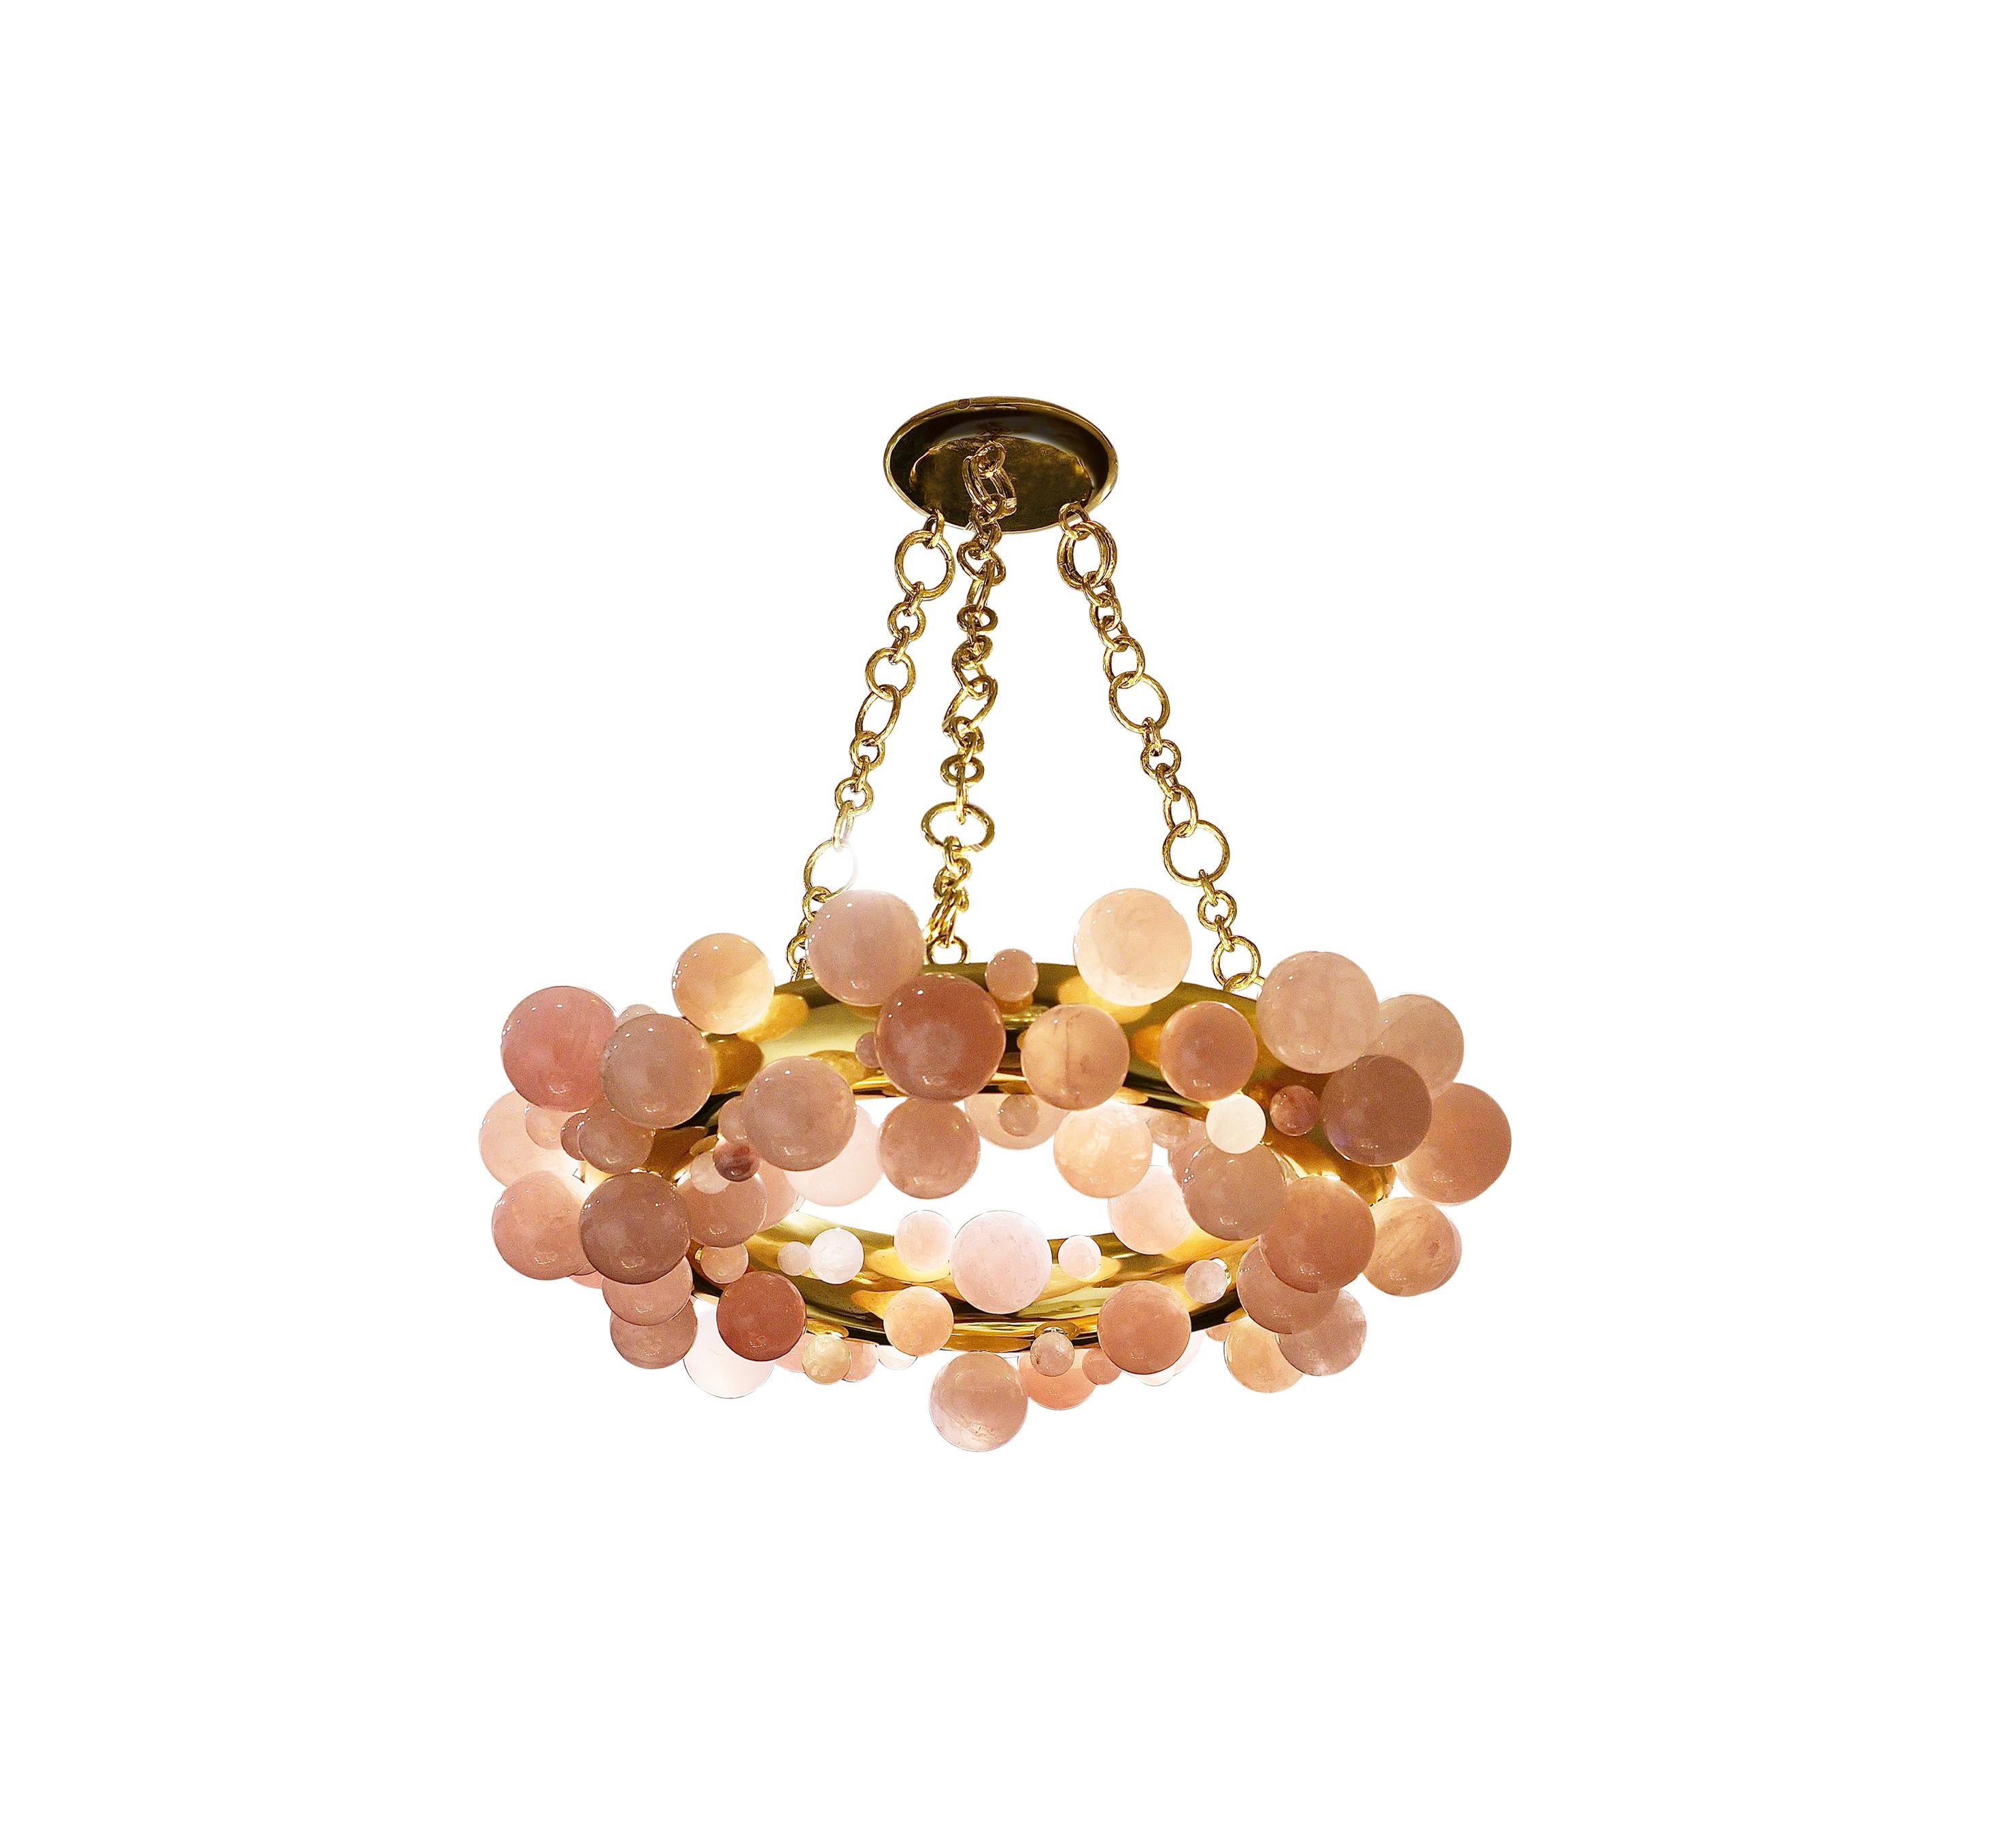 A pair of pink bubble ring rock crystal chandeliers with polish brass frame. Created by Phoenix Gallery, NYC.
Each chandelier install 10 sockets. Use 60w LED warm light bulbs. Total of 600w. 
Custom size and metal finish upon request.
 